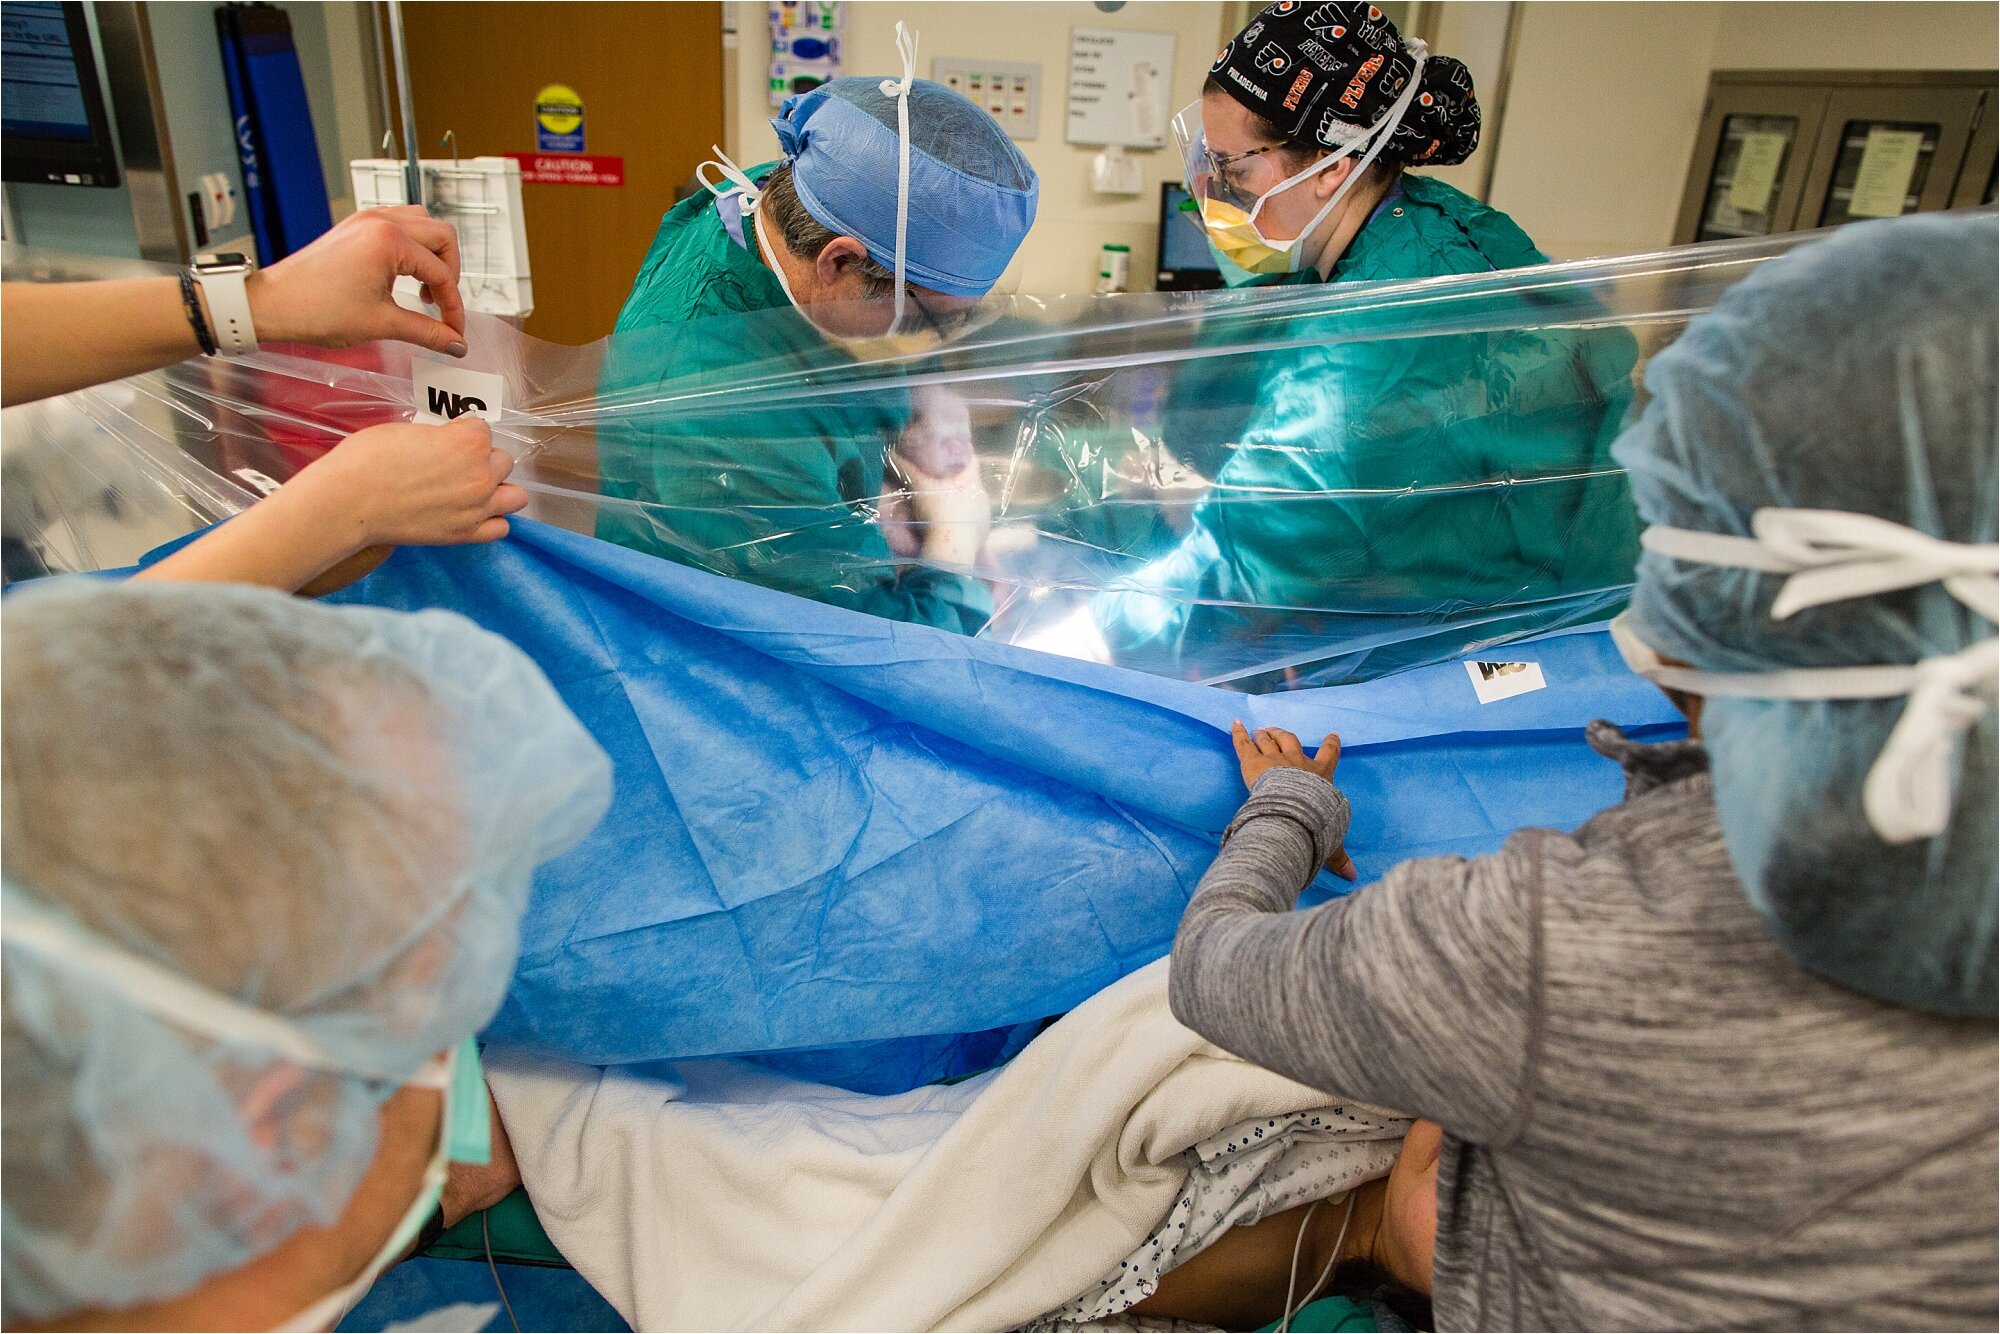 OBGYN lifts baby out of mom during c-section while the drape is pulled down so the parents can see, Philadelphia Birth Photography